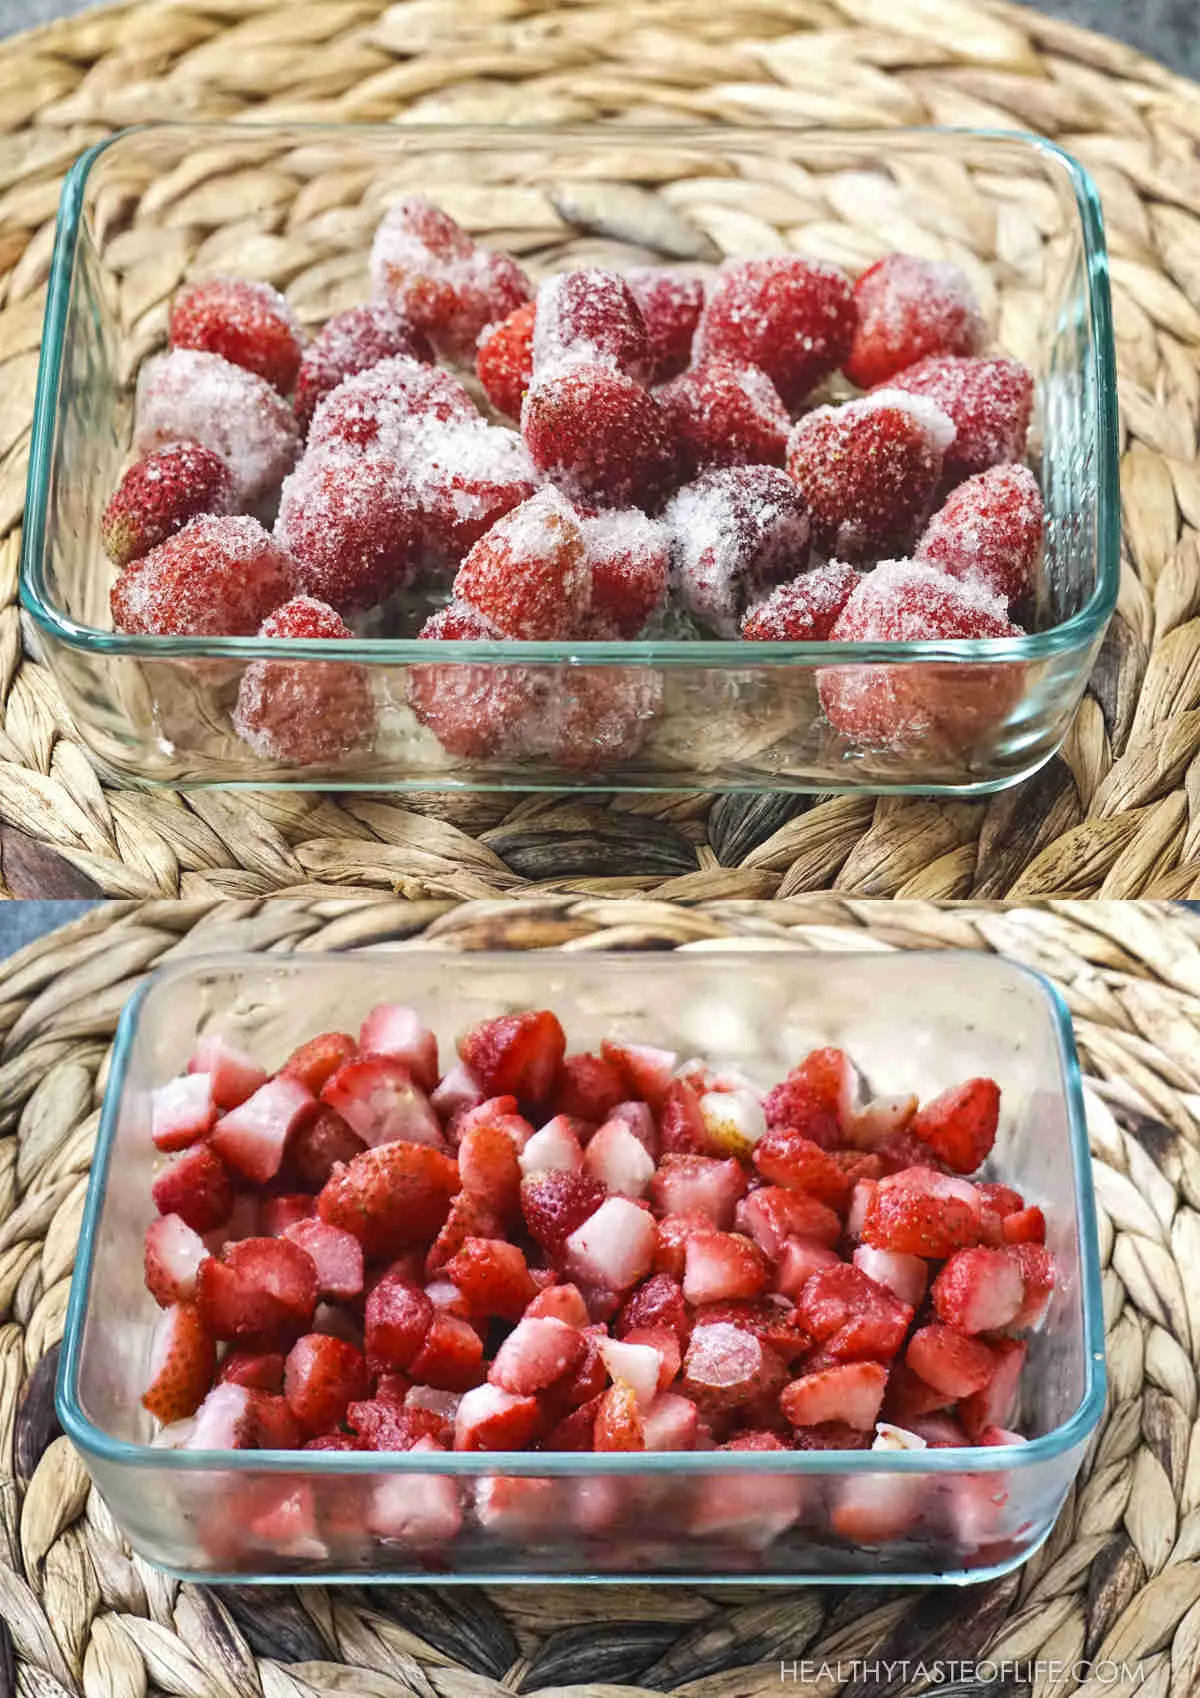 Picture showing how to prepare the frozen strawberries for making strawberry muffins- diced into smaller chunks.